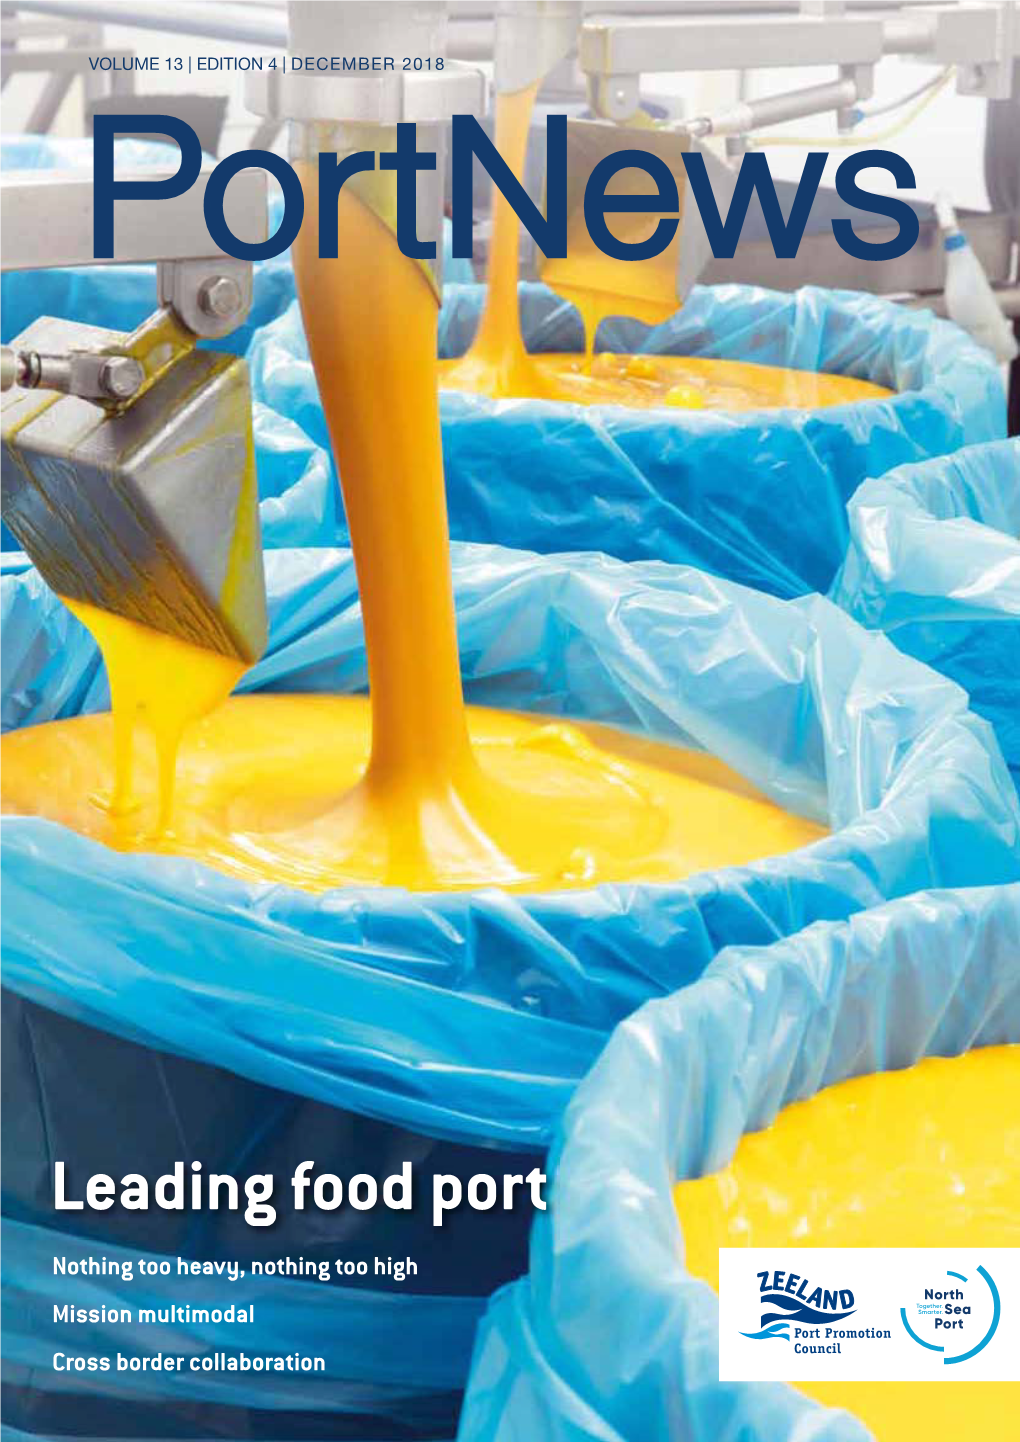 Leading Food Port Nothing Too Heavy, Nothing Too High Mission Multimodal Cross Border Collaboration Northseaport.Com